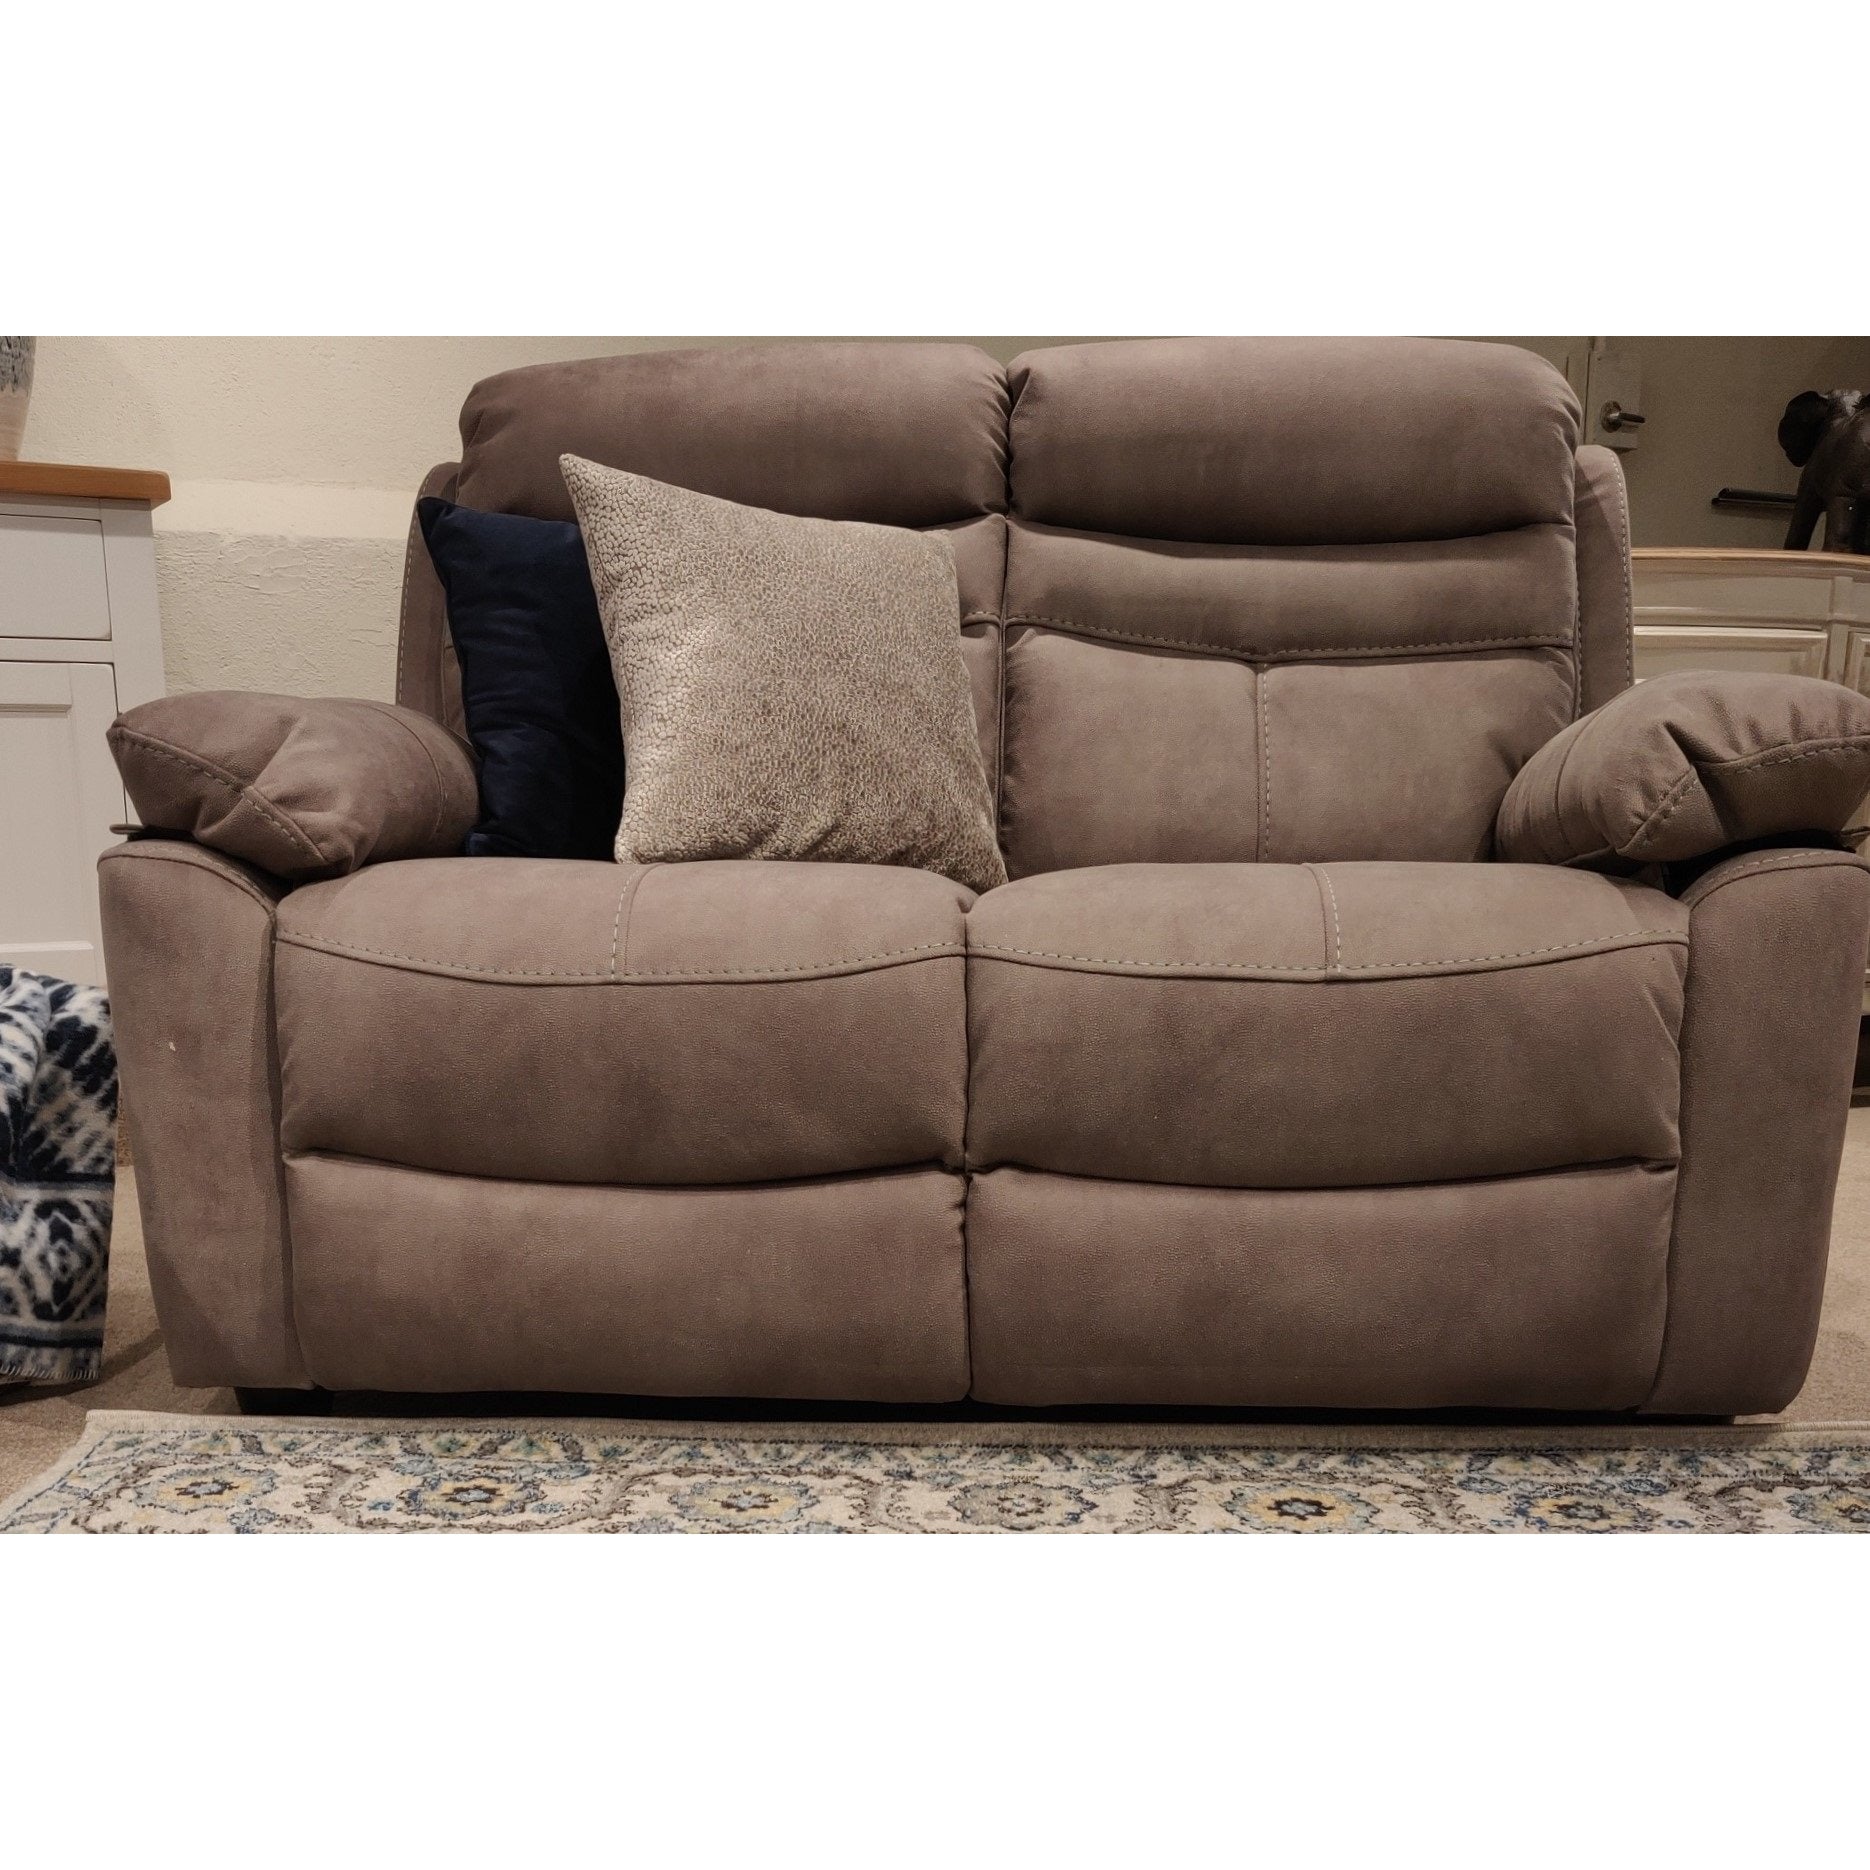 Lucy 2 Seater Recliner Grey from Upstairs Downstairs Furniture in Lisburn, Monaghan and Enniskillen